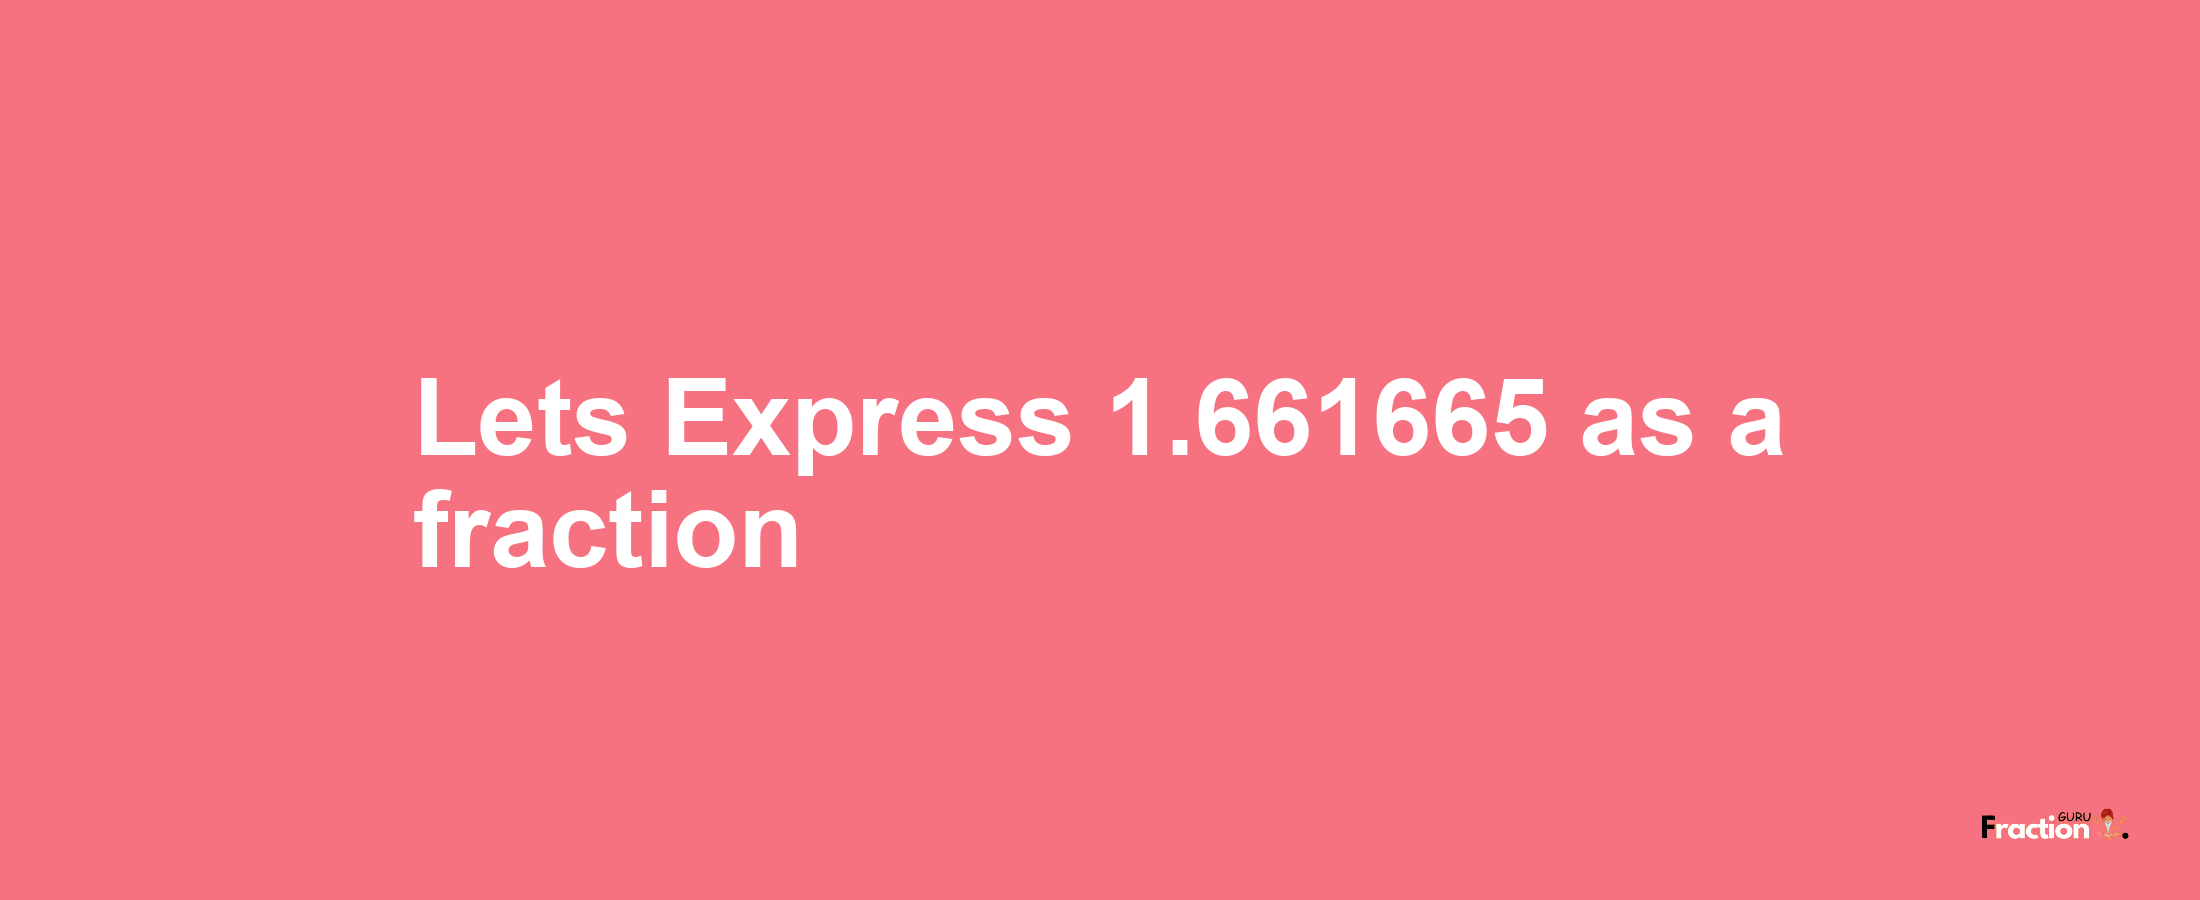 Lets Express 1.661665 as afraction